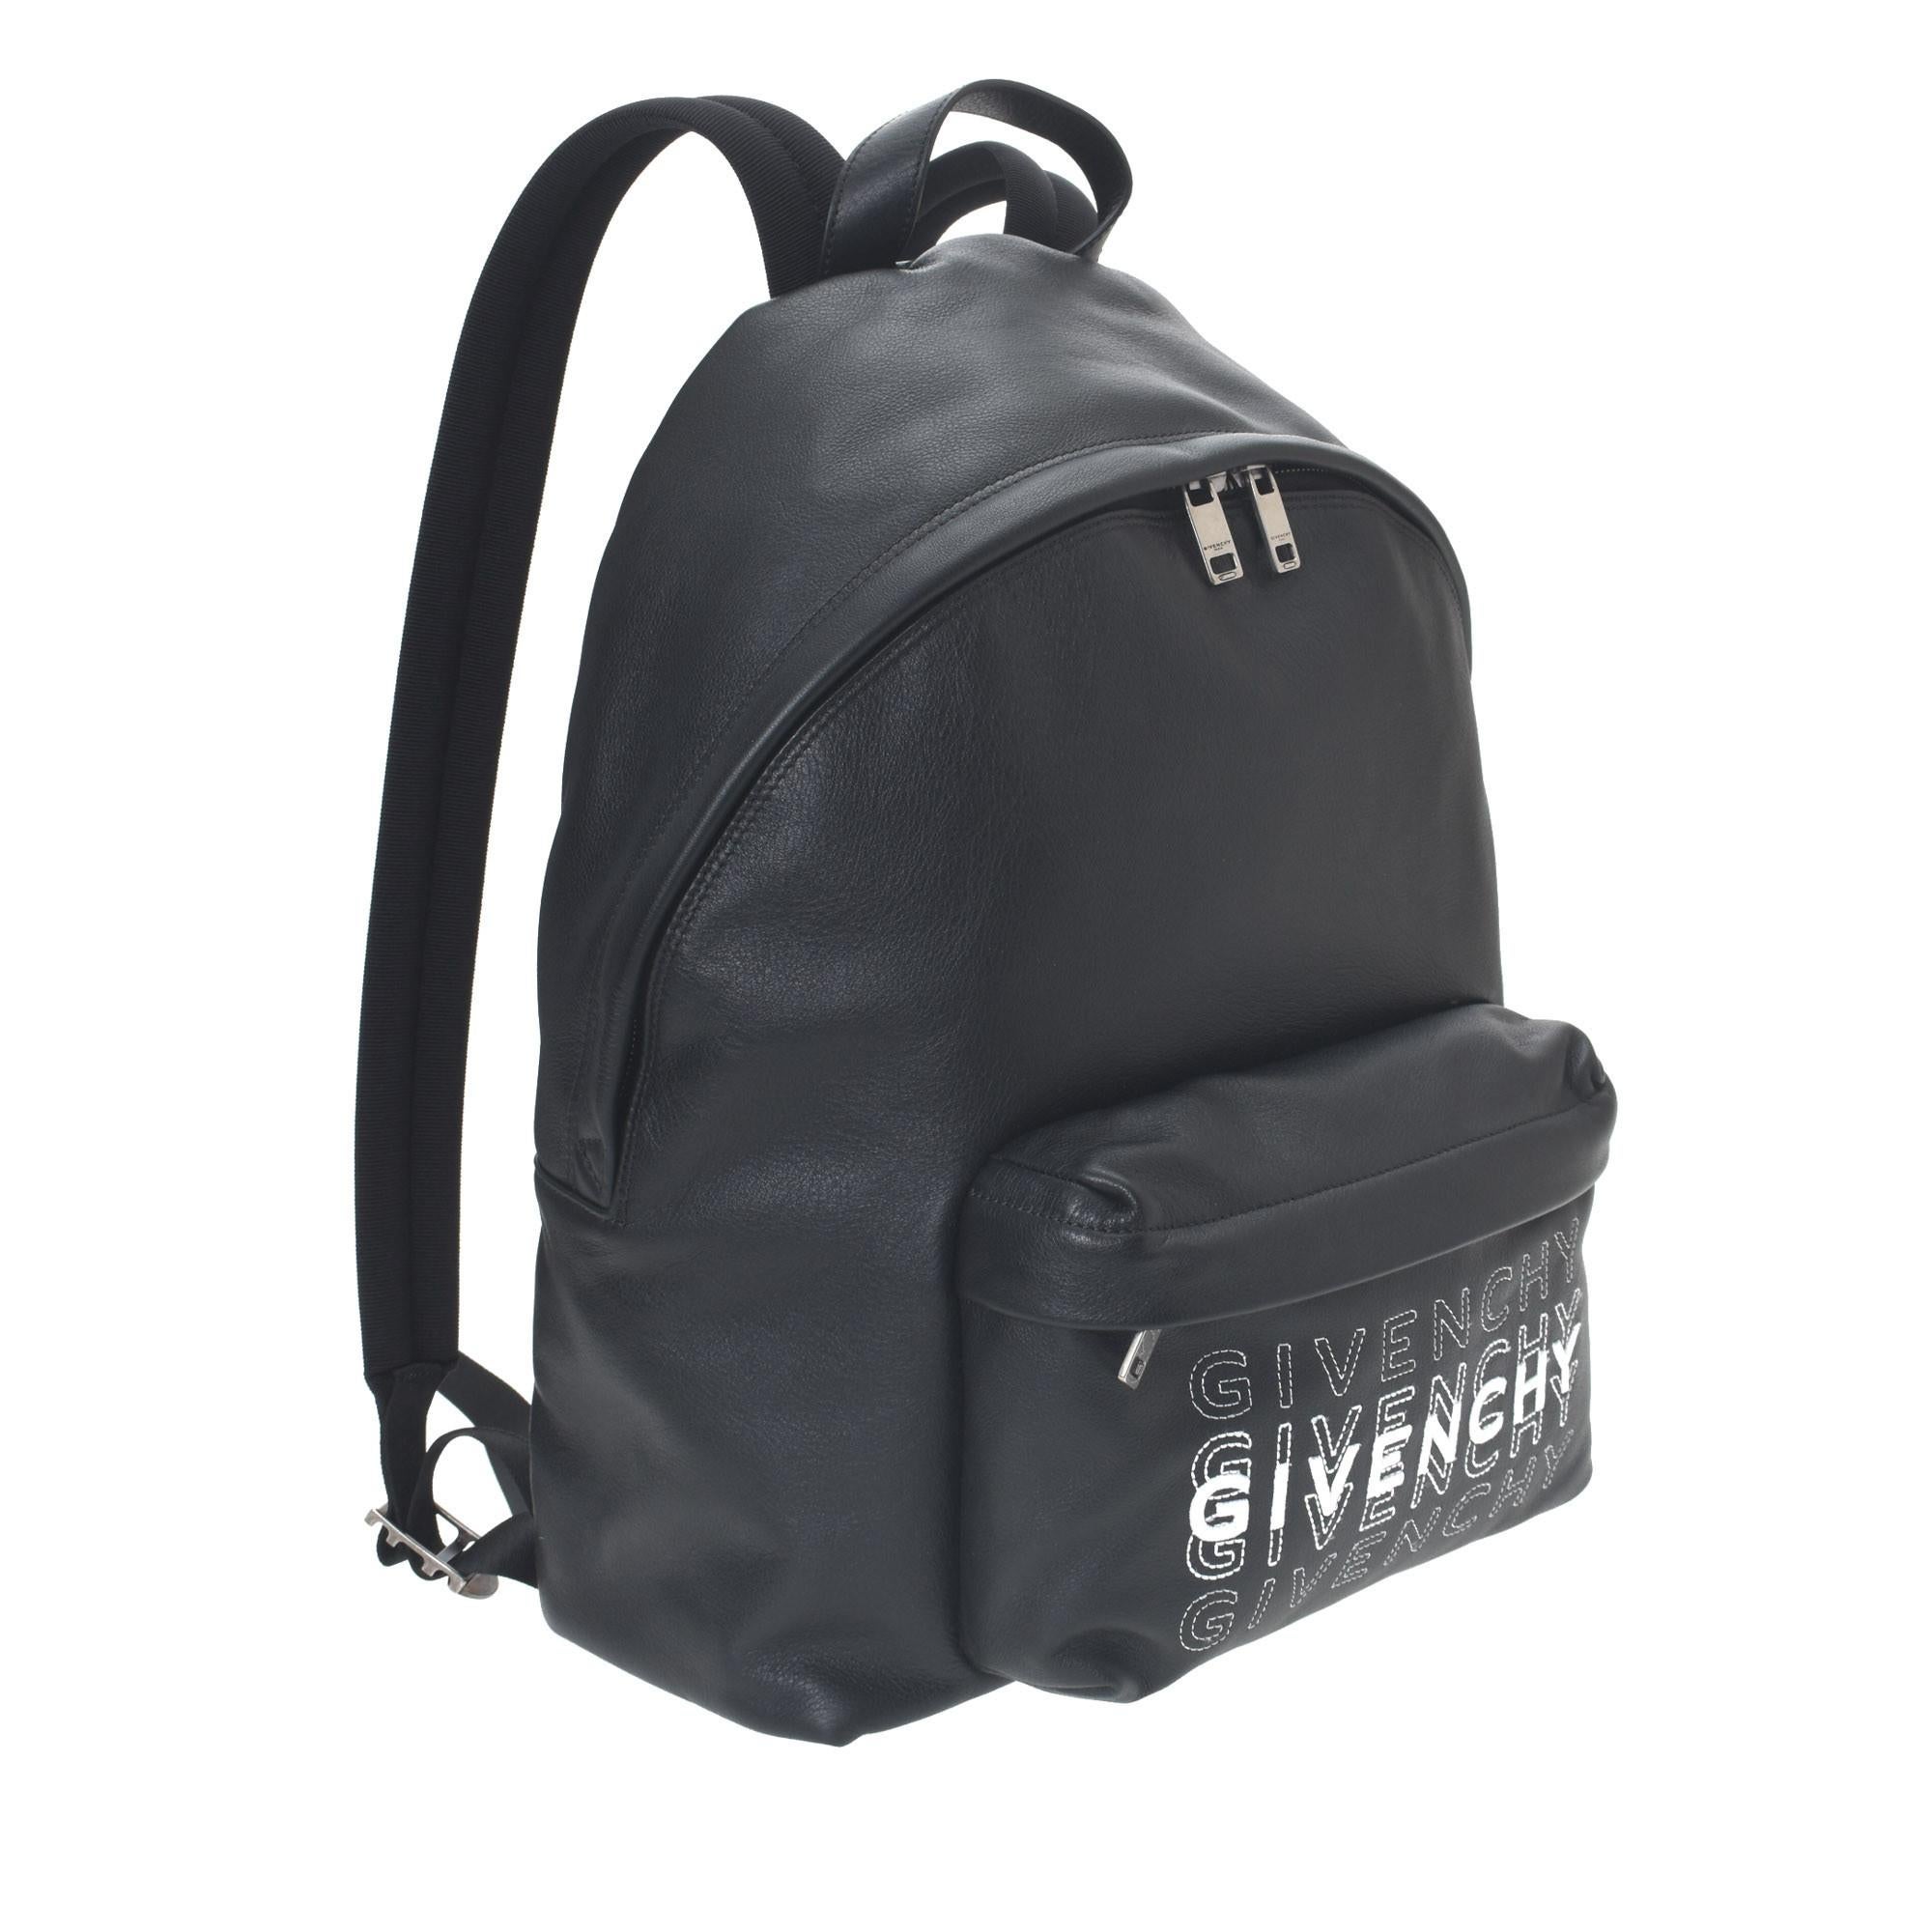 Super functional Givenchy leather logo Backpack in black. Excellent Condition . Guaranteed authentic by LXRandCo. 
